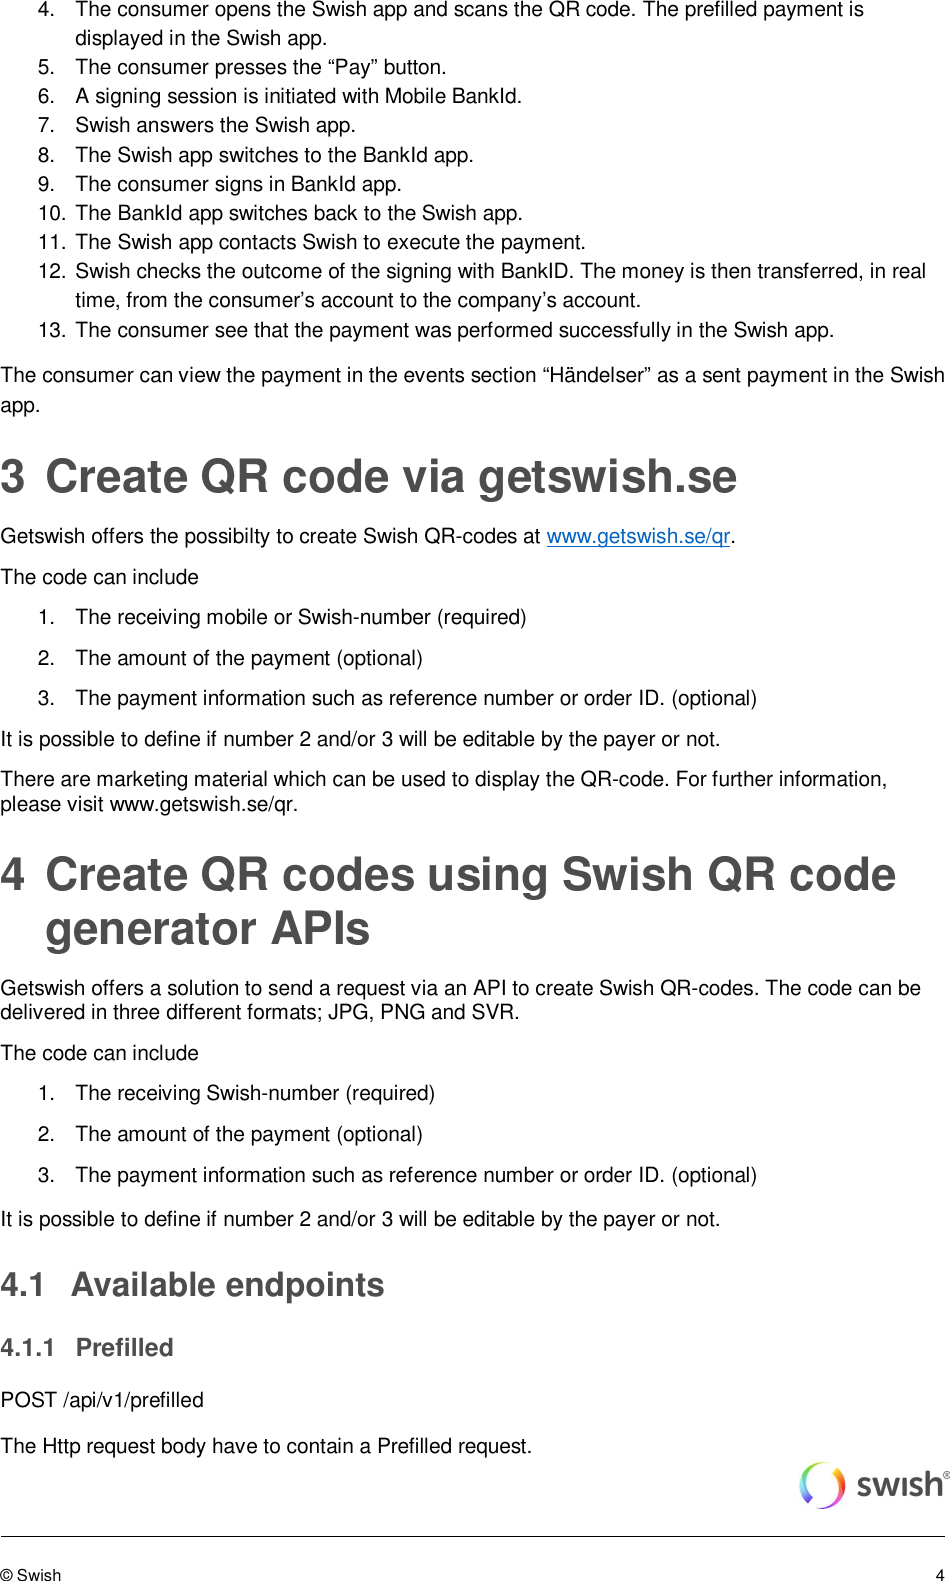 Page 4 of 8 - Guide-Swish-QR-code-design-specification V1.5